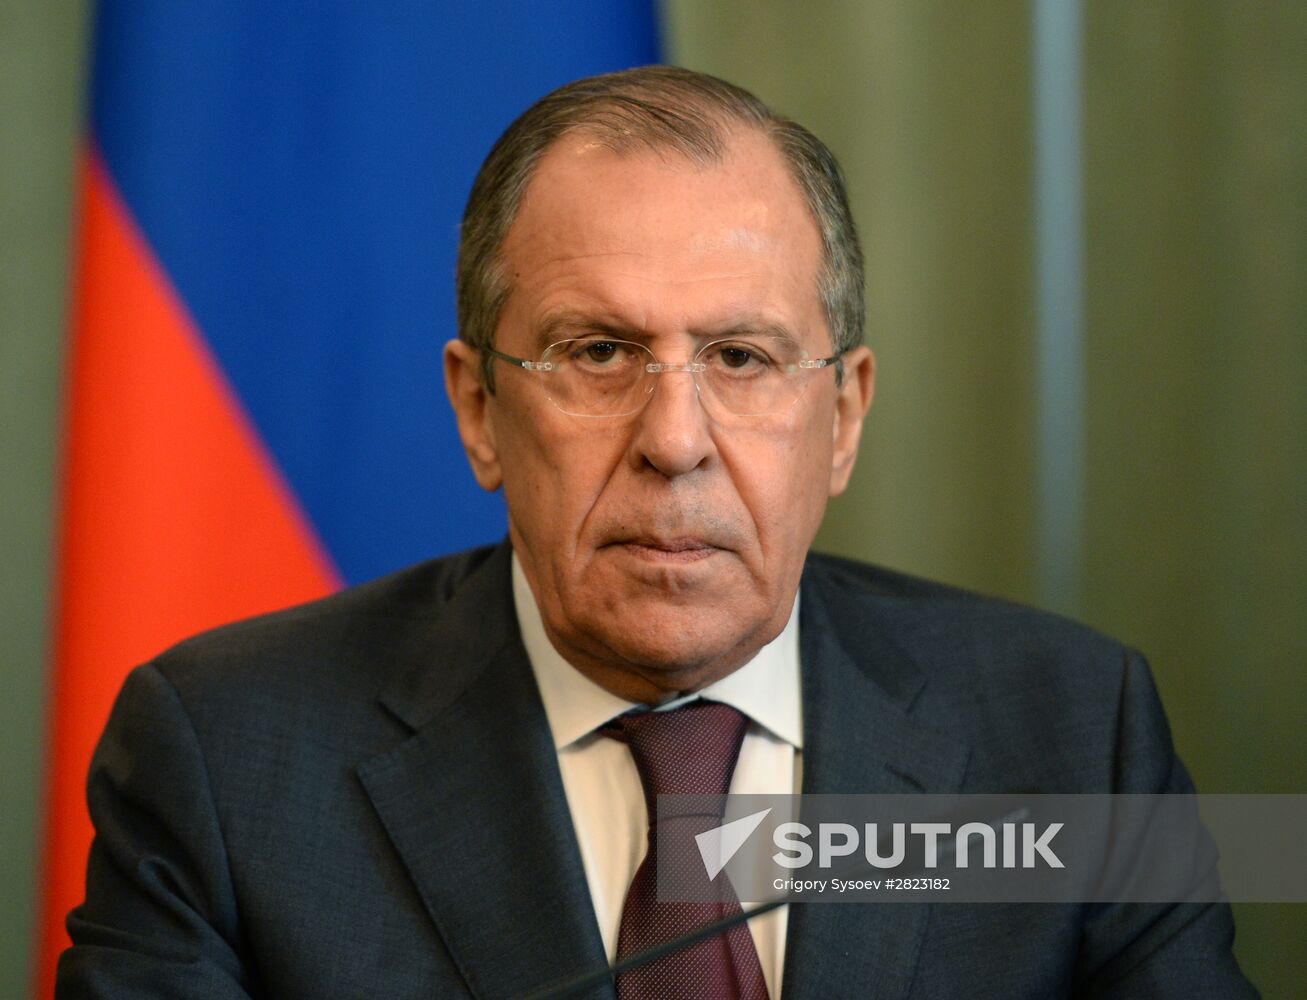 Russian Foreign Minister Sergey Lavrov meets with Bolivian Foreign Minister David Choquehuanca Céspedes